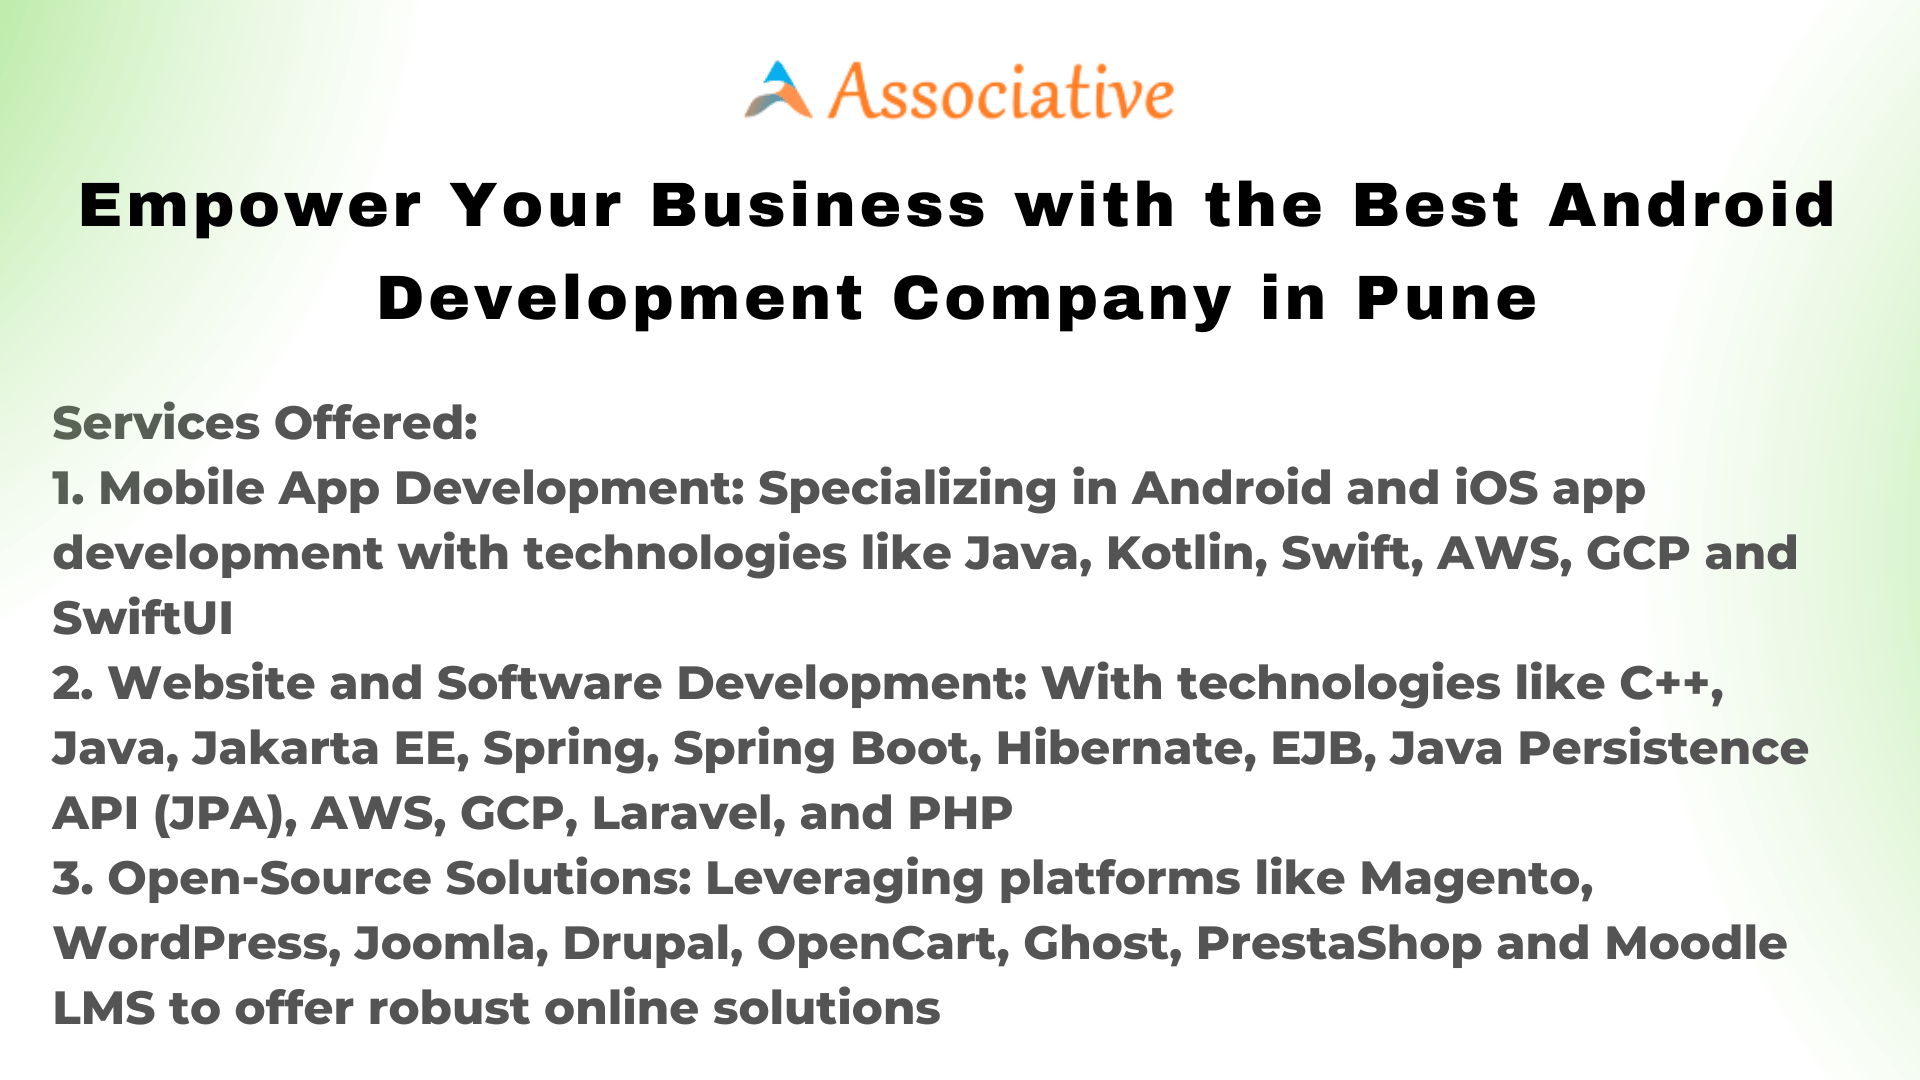 Empower Your Business with the Best Android Development Company in Pune